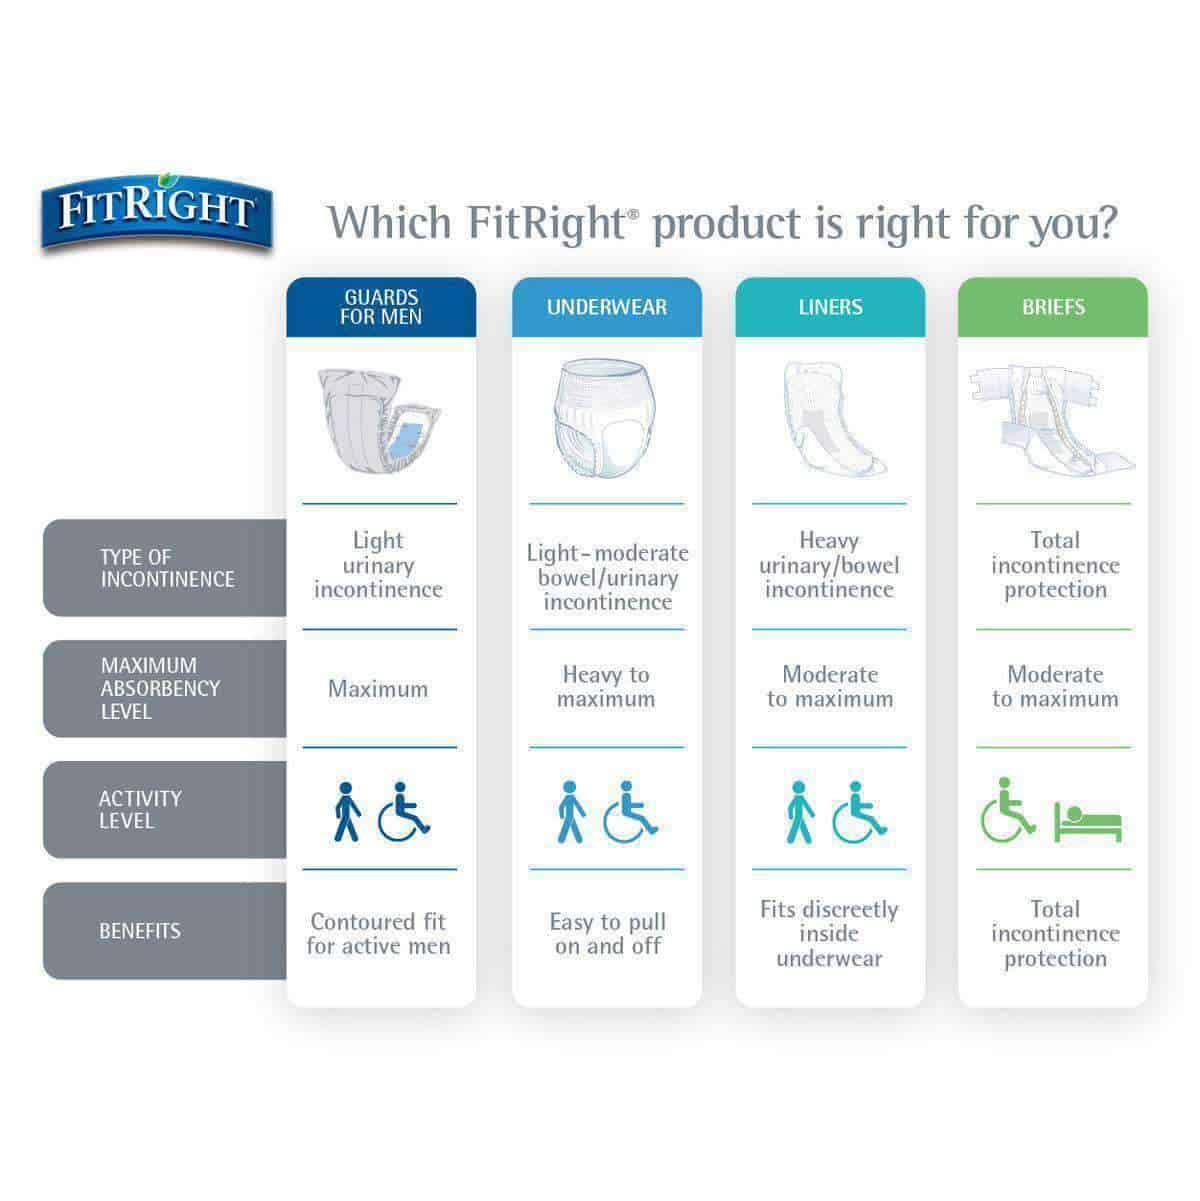 FitRight Plus Adult Diapers - Unisex Disposable Incontinence Briefs wi